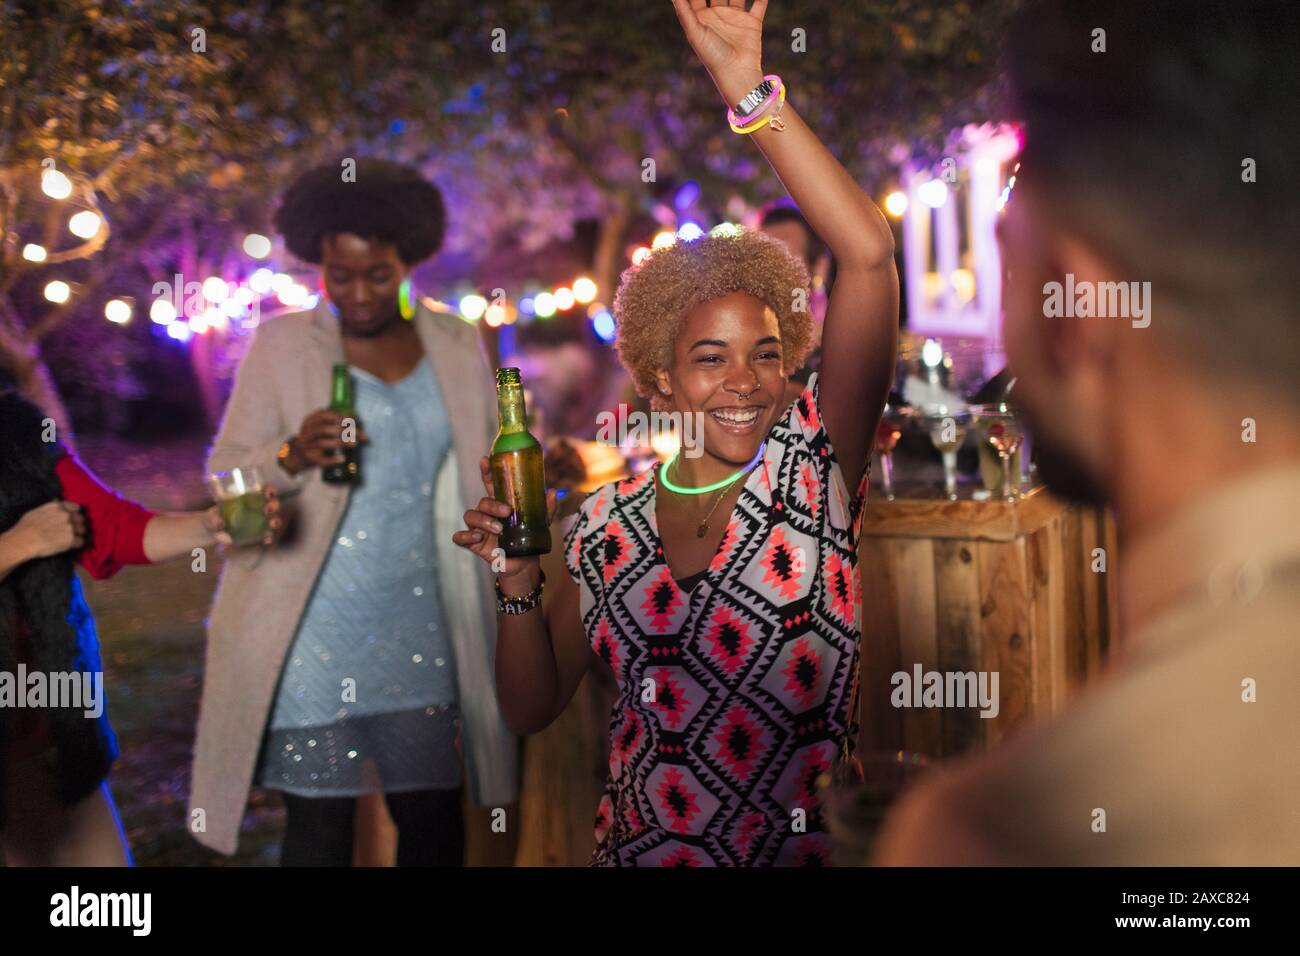 Carefree woman dancing and drinking at garden party Stock Photo